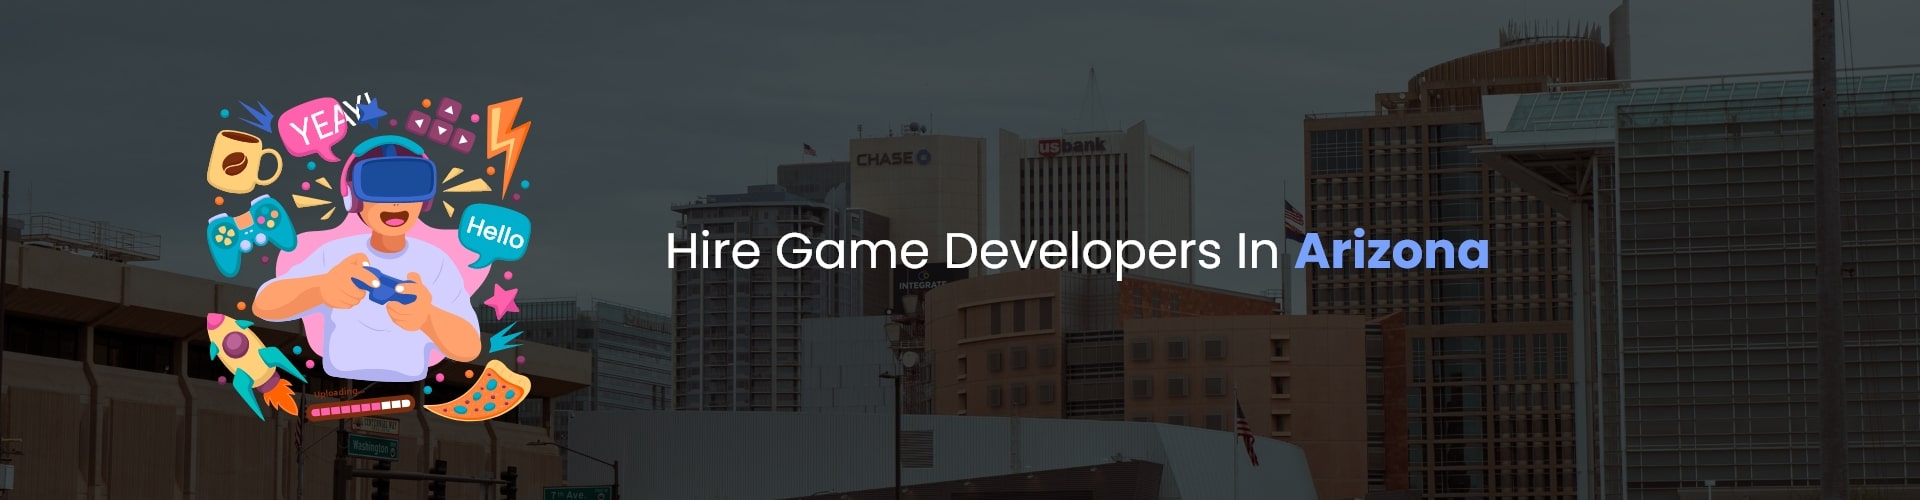 hire game developers in arizona